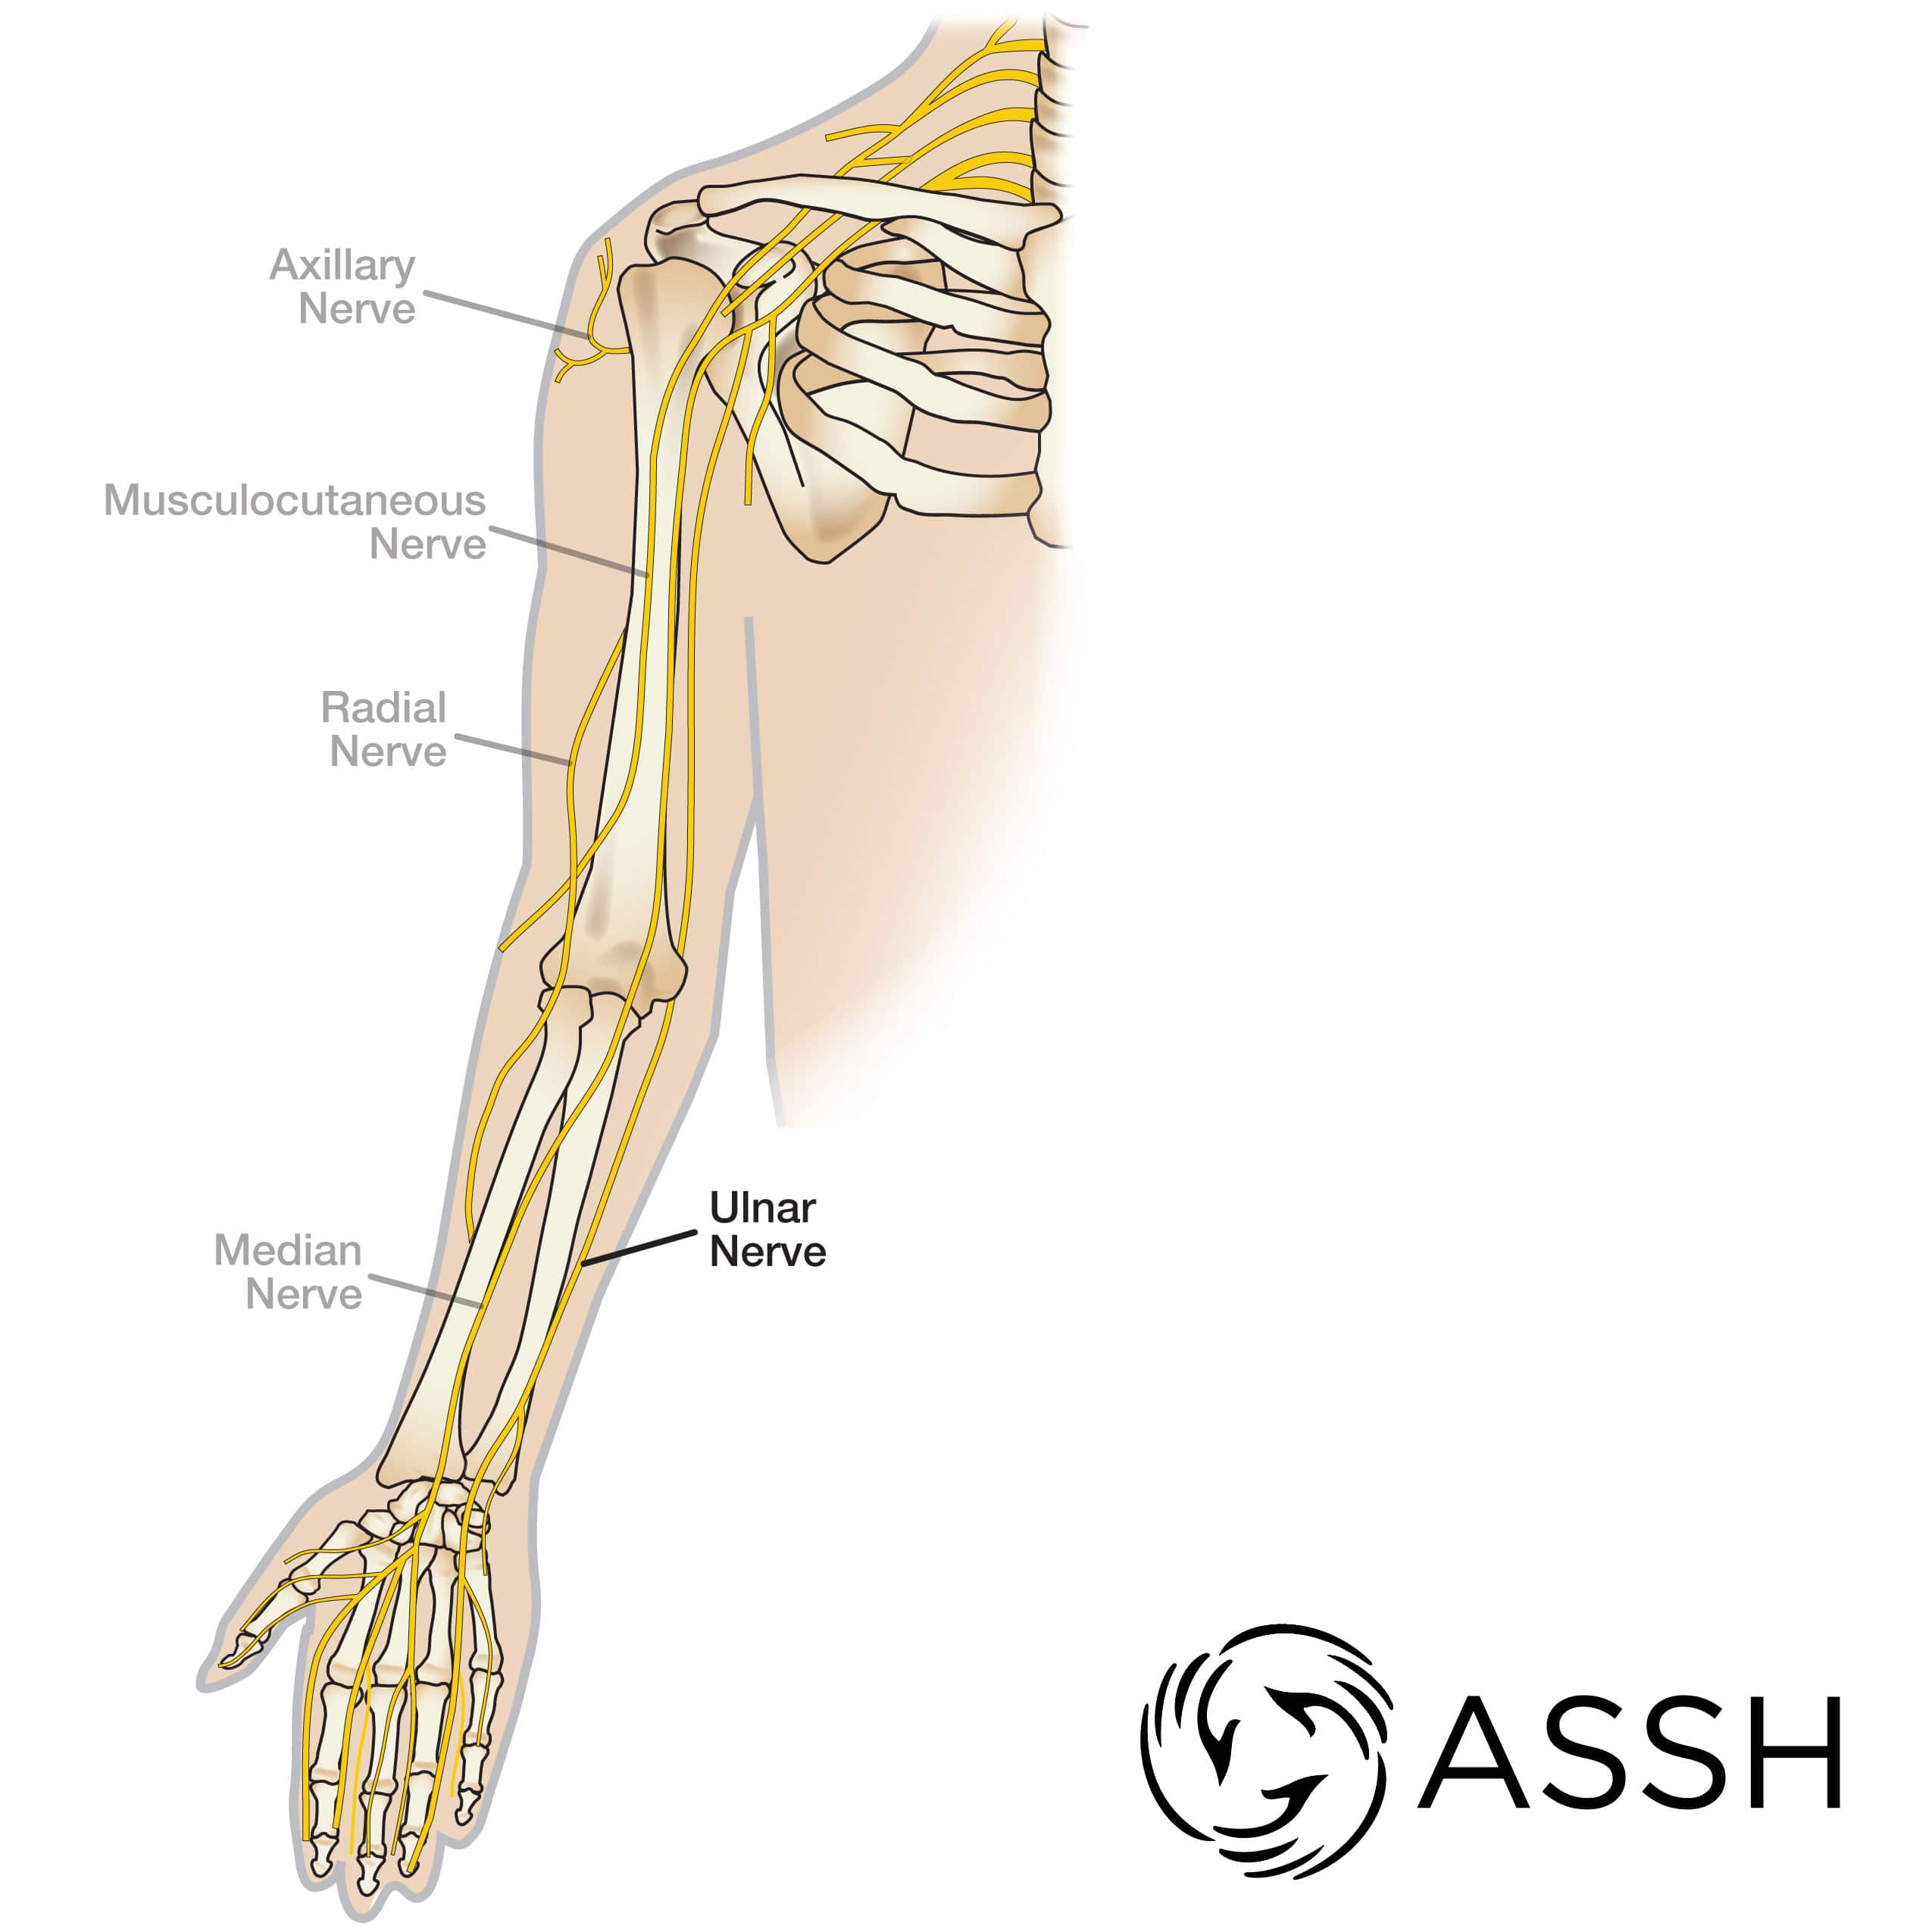 Ulnar Nerve Entrapment Cheshire  Cubital Tunnel Syndrome Stafford